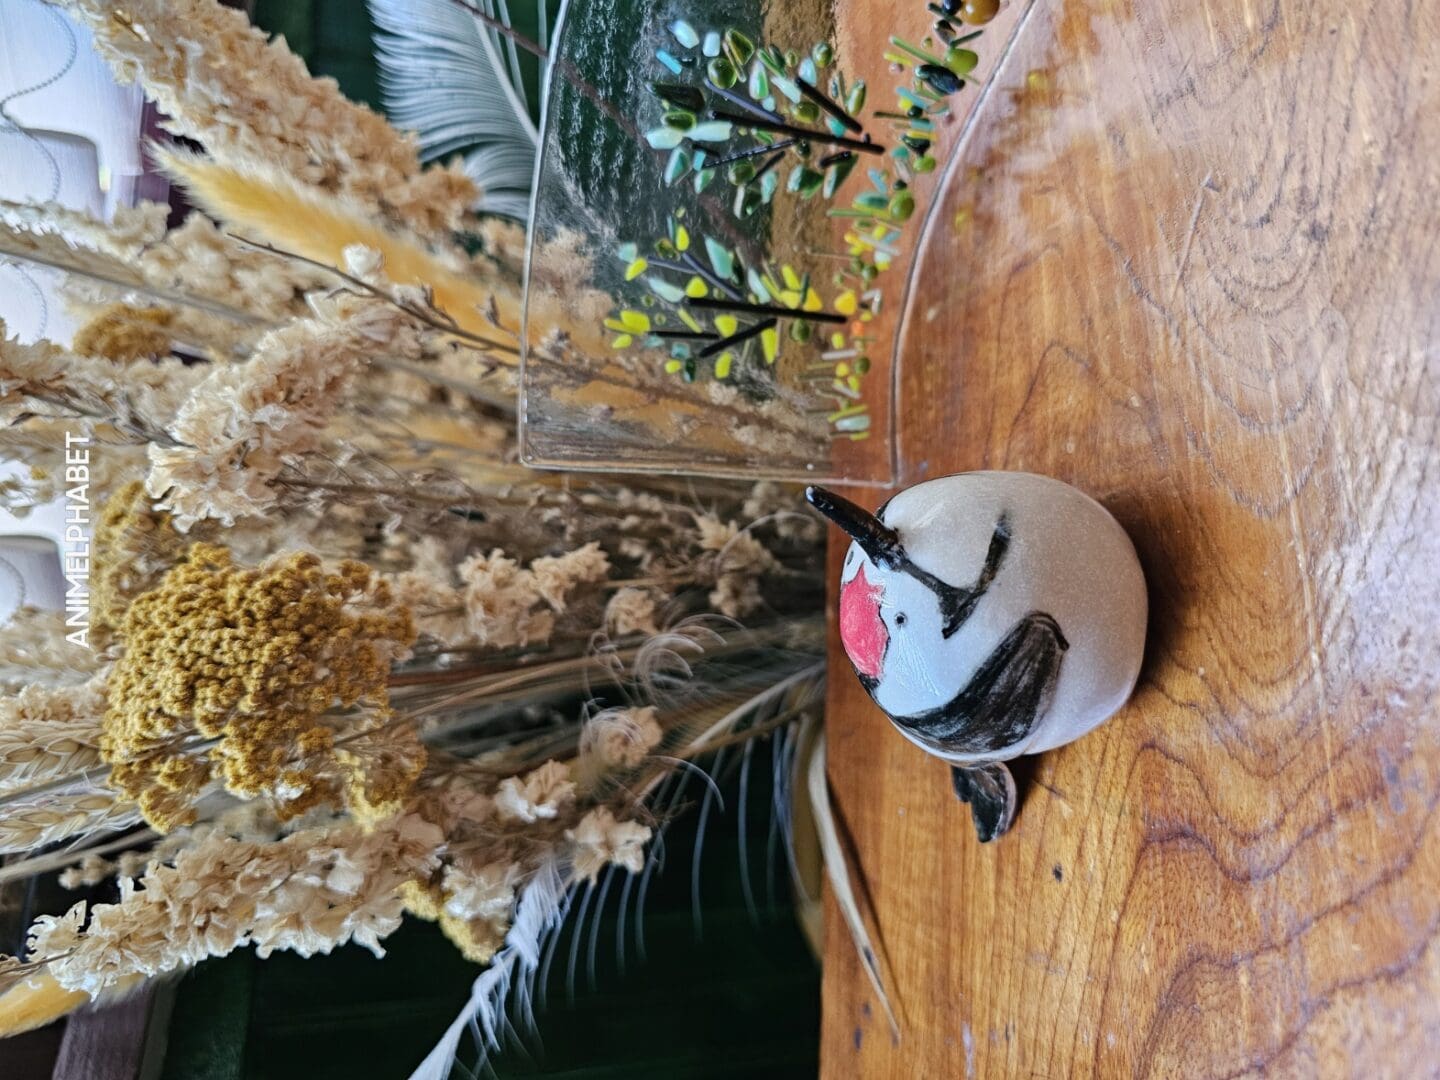 Ceramic lesser spotted woodpecker sat on a wooden table, with dried flowers behind and glass art to the side